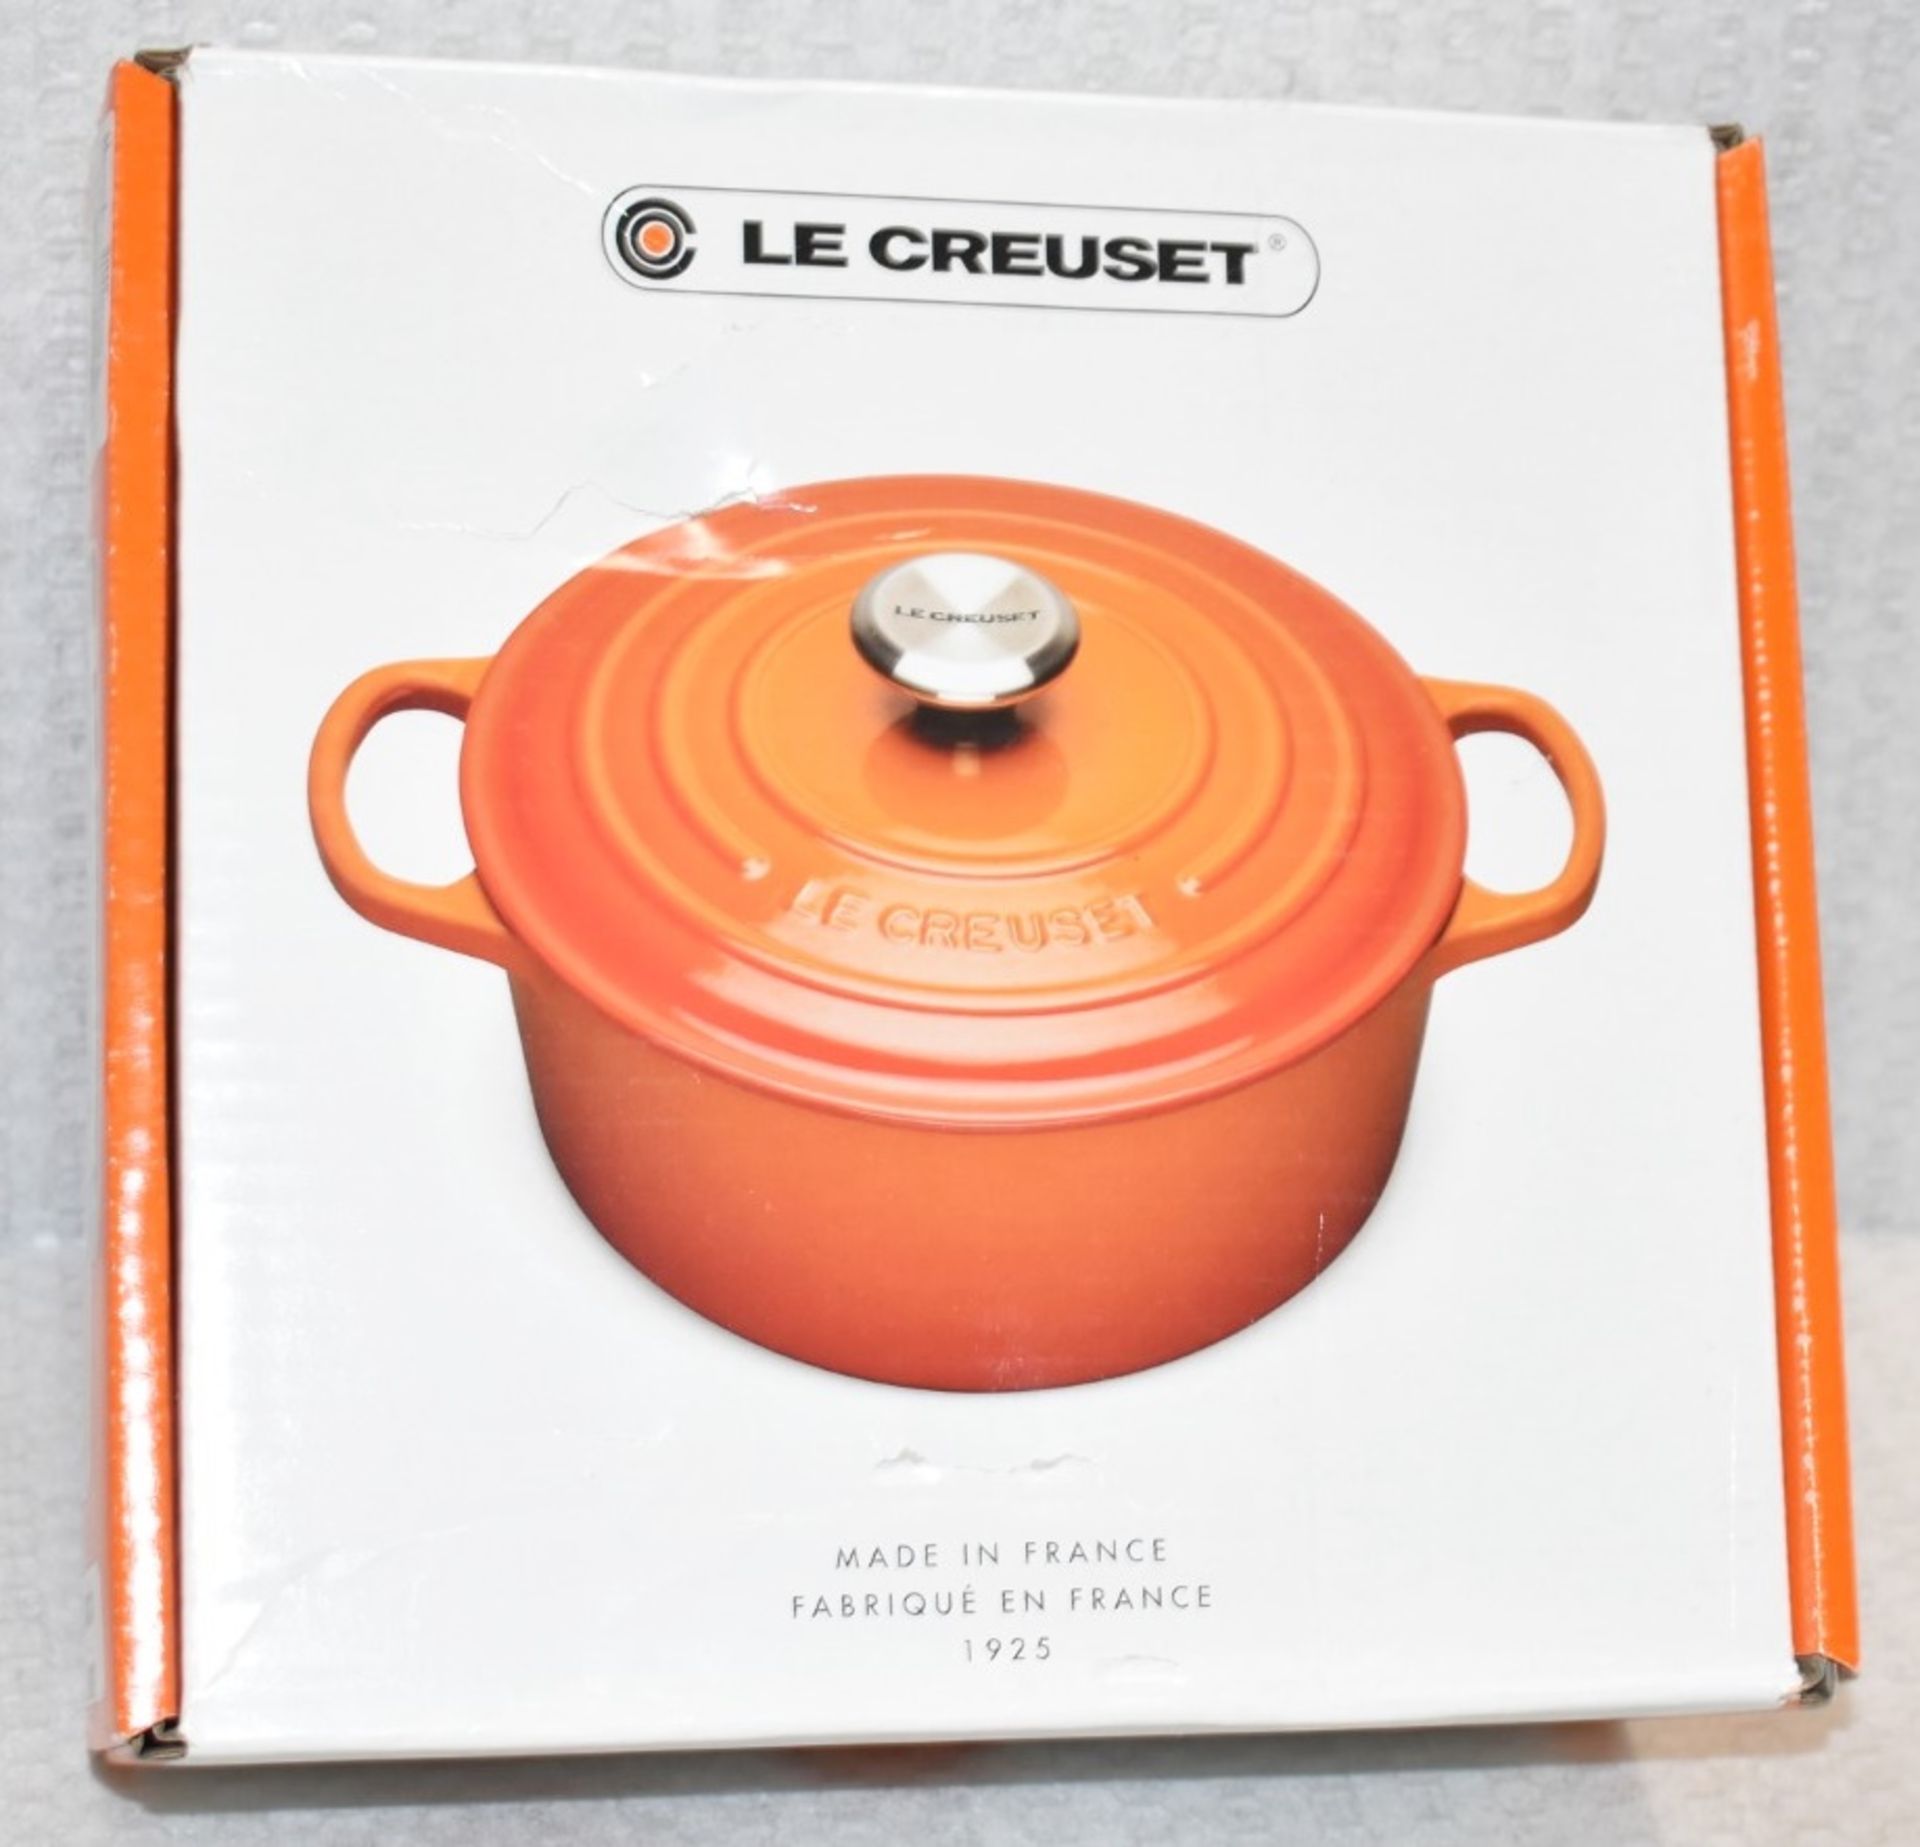 1 x LE CREUSET Enamelled Cast Iron Round Casserole Dish in Bamboo Green (20cm) - RRP £215.00 - Image 13 of 16